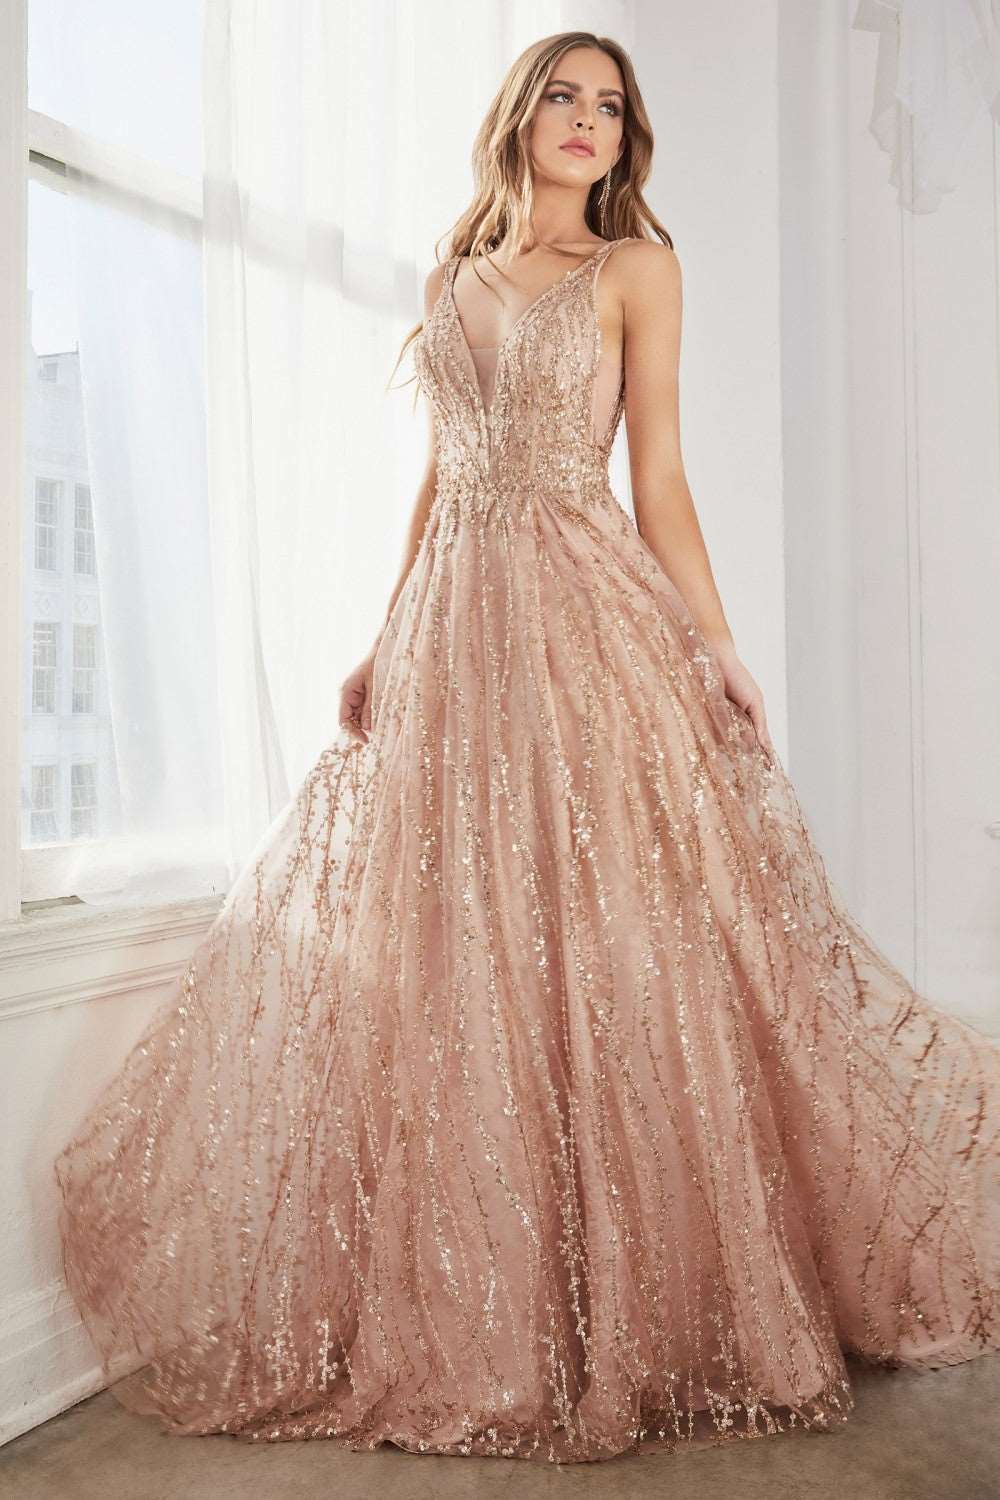 CD C32 - Glitter & Lace A-Line Prom Gown with V-Neck Sheer Side Panels & Open Back PROM GOWN Cinderella Divine 4 ROSE GOLD 